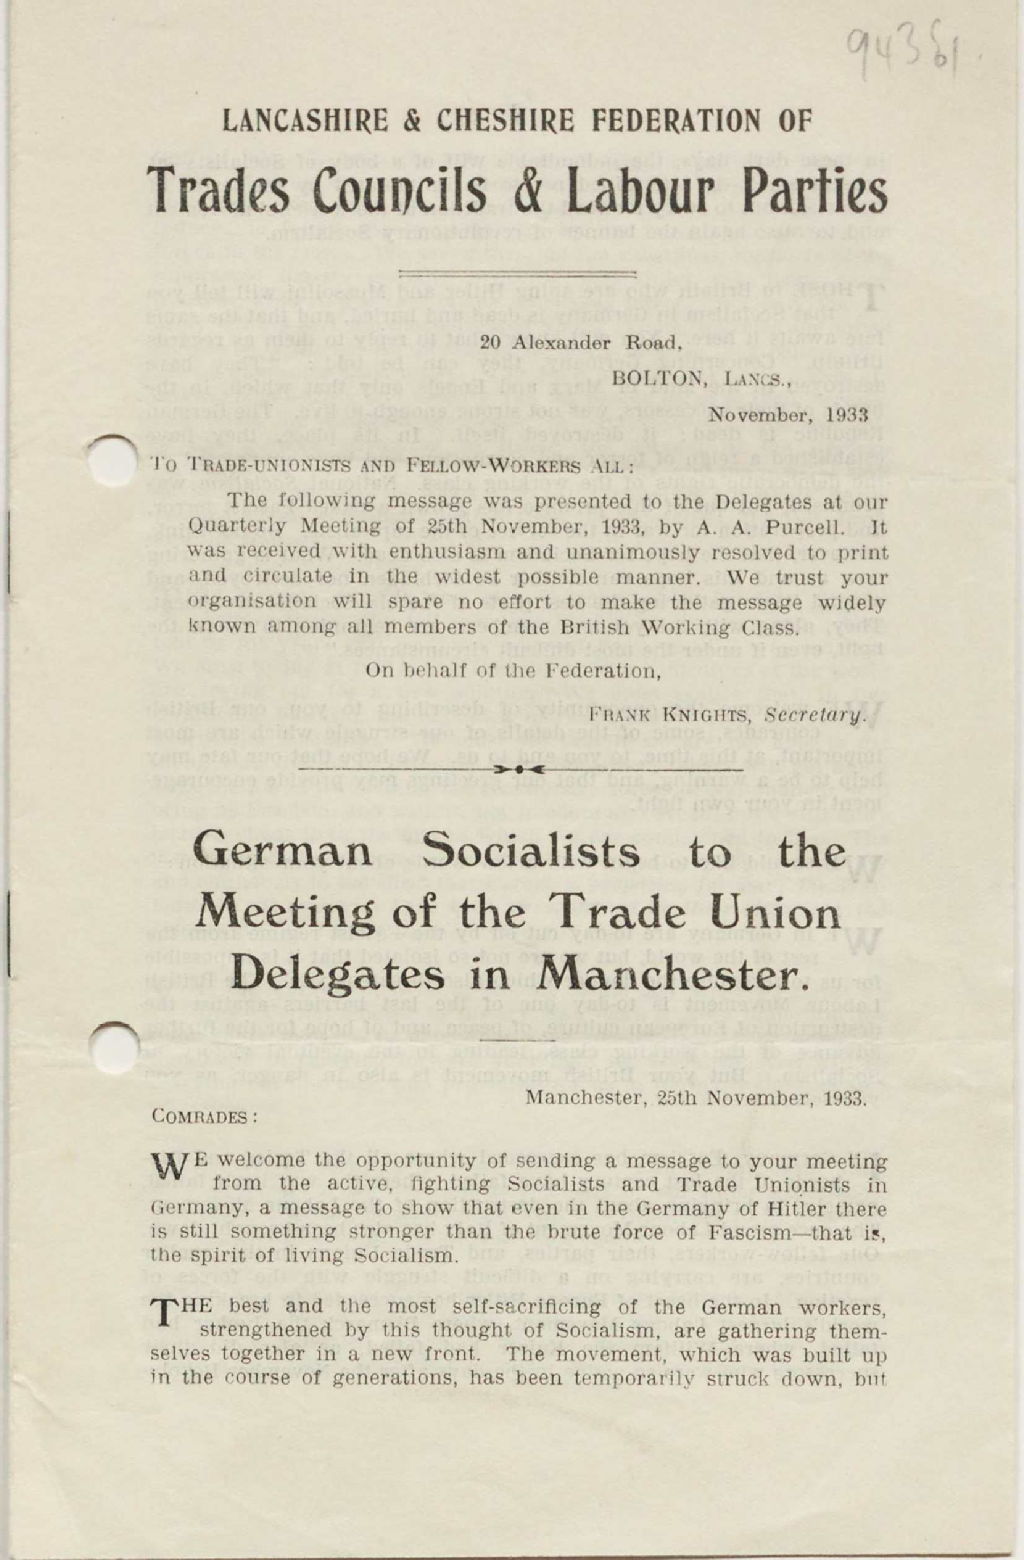 German socialists to the meeting of the Trade Union Delegates in Manchester, 1933